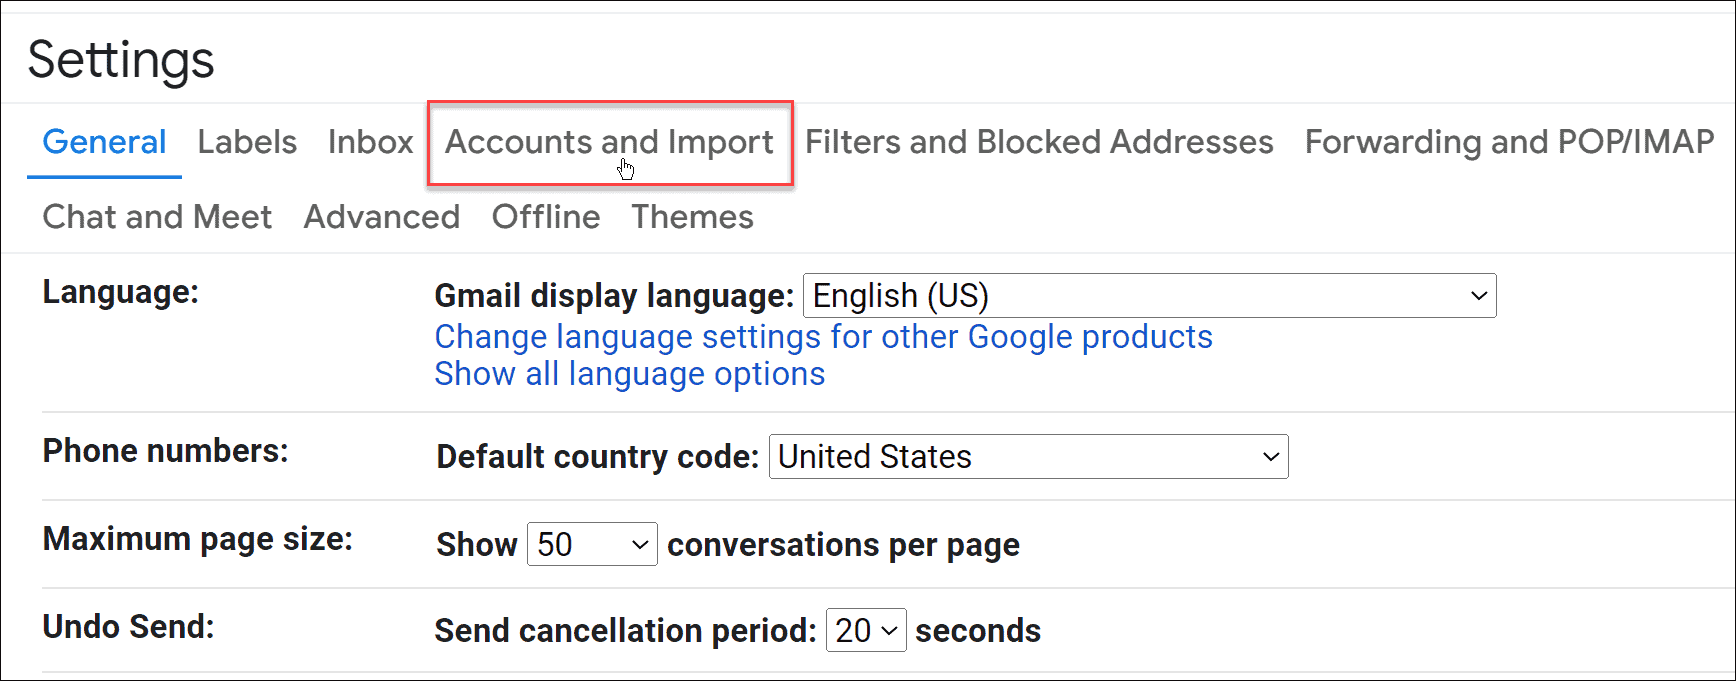 Accounts and Import